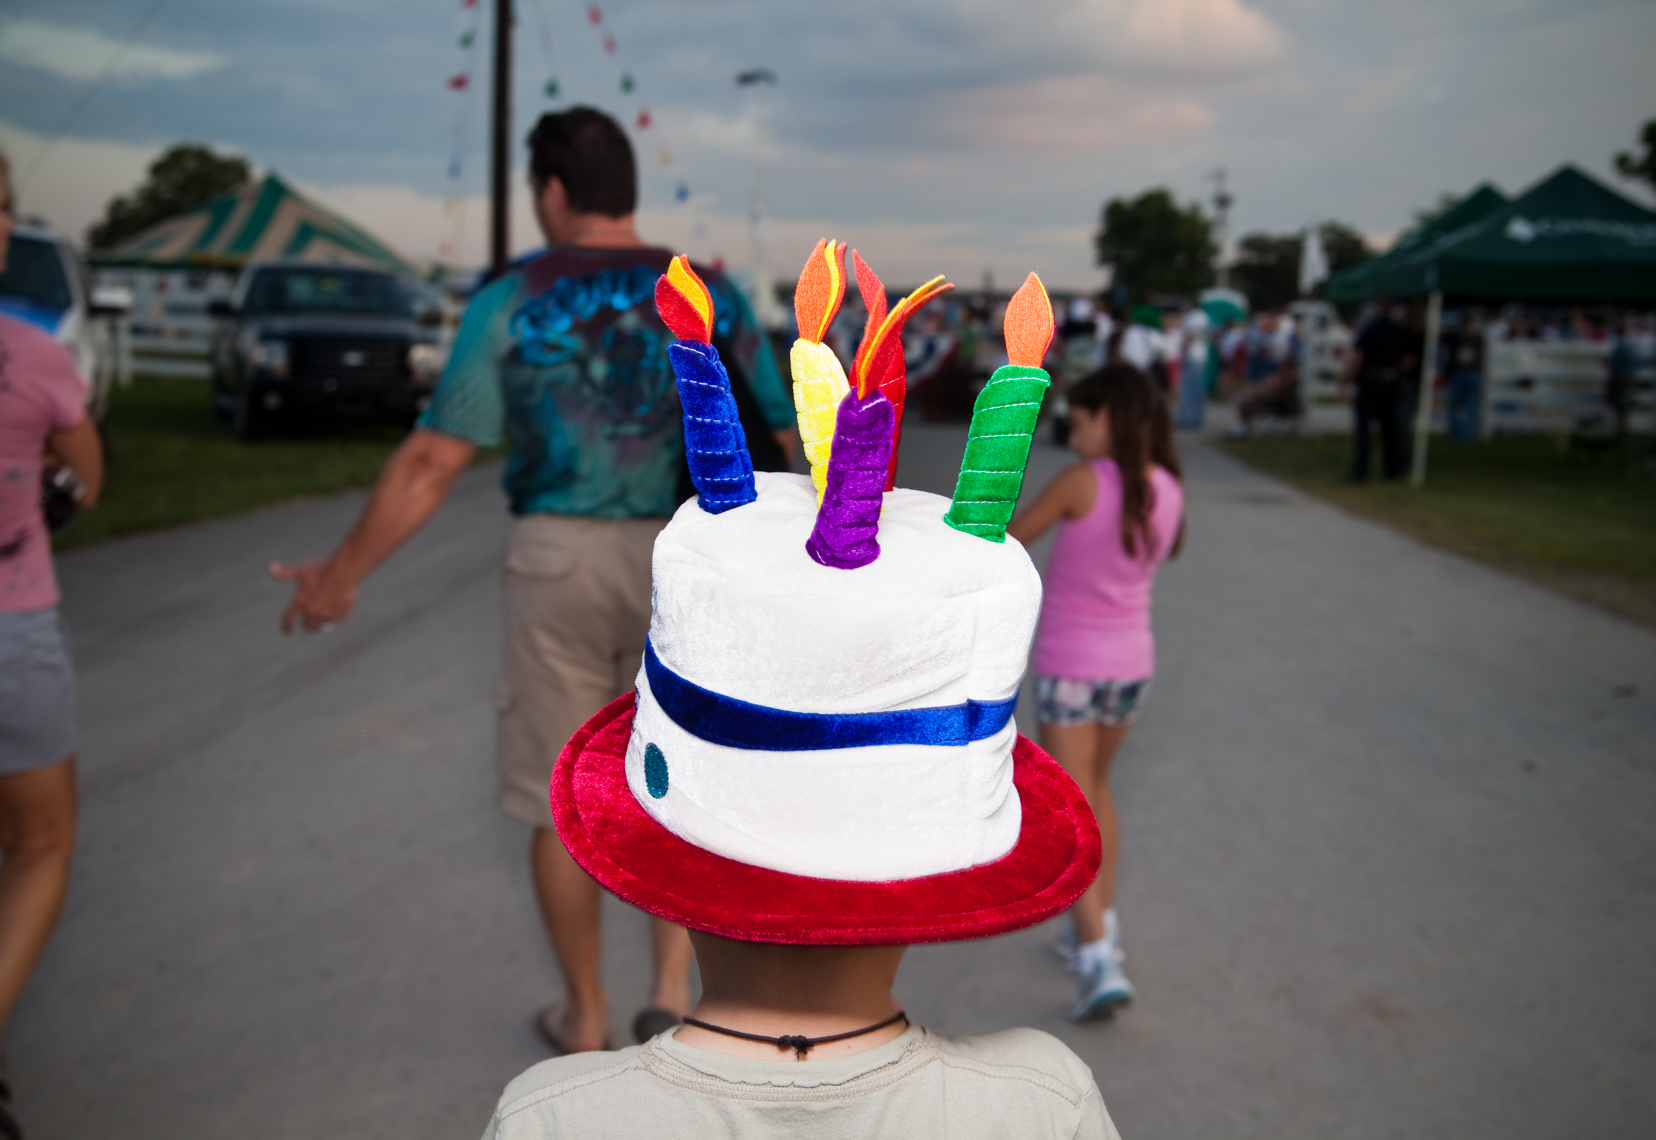 Boy with cake and candles hat, costume, Wilson County Fair, Lebanon, Tennessee, carnival, amusement park, rural south